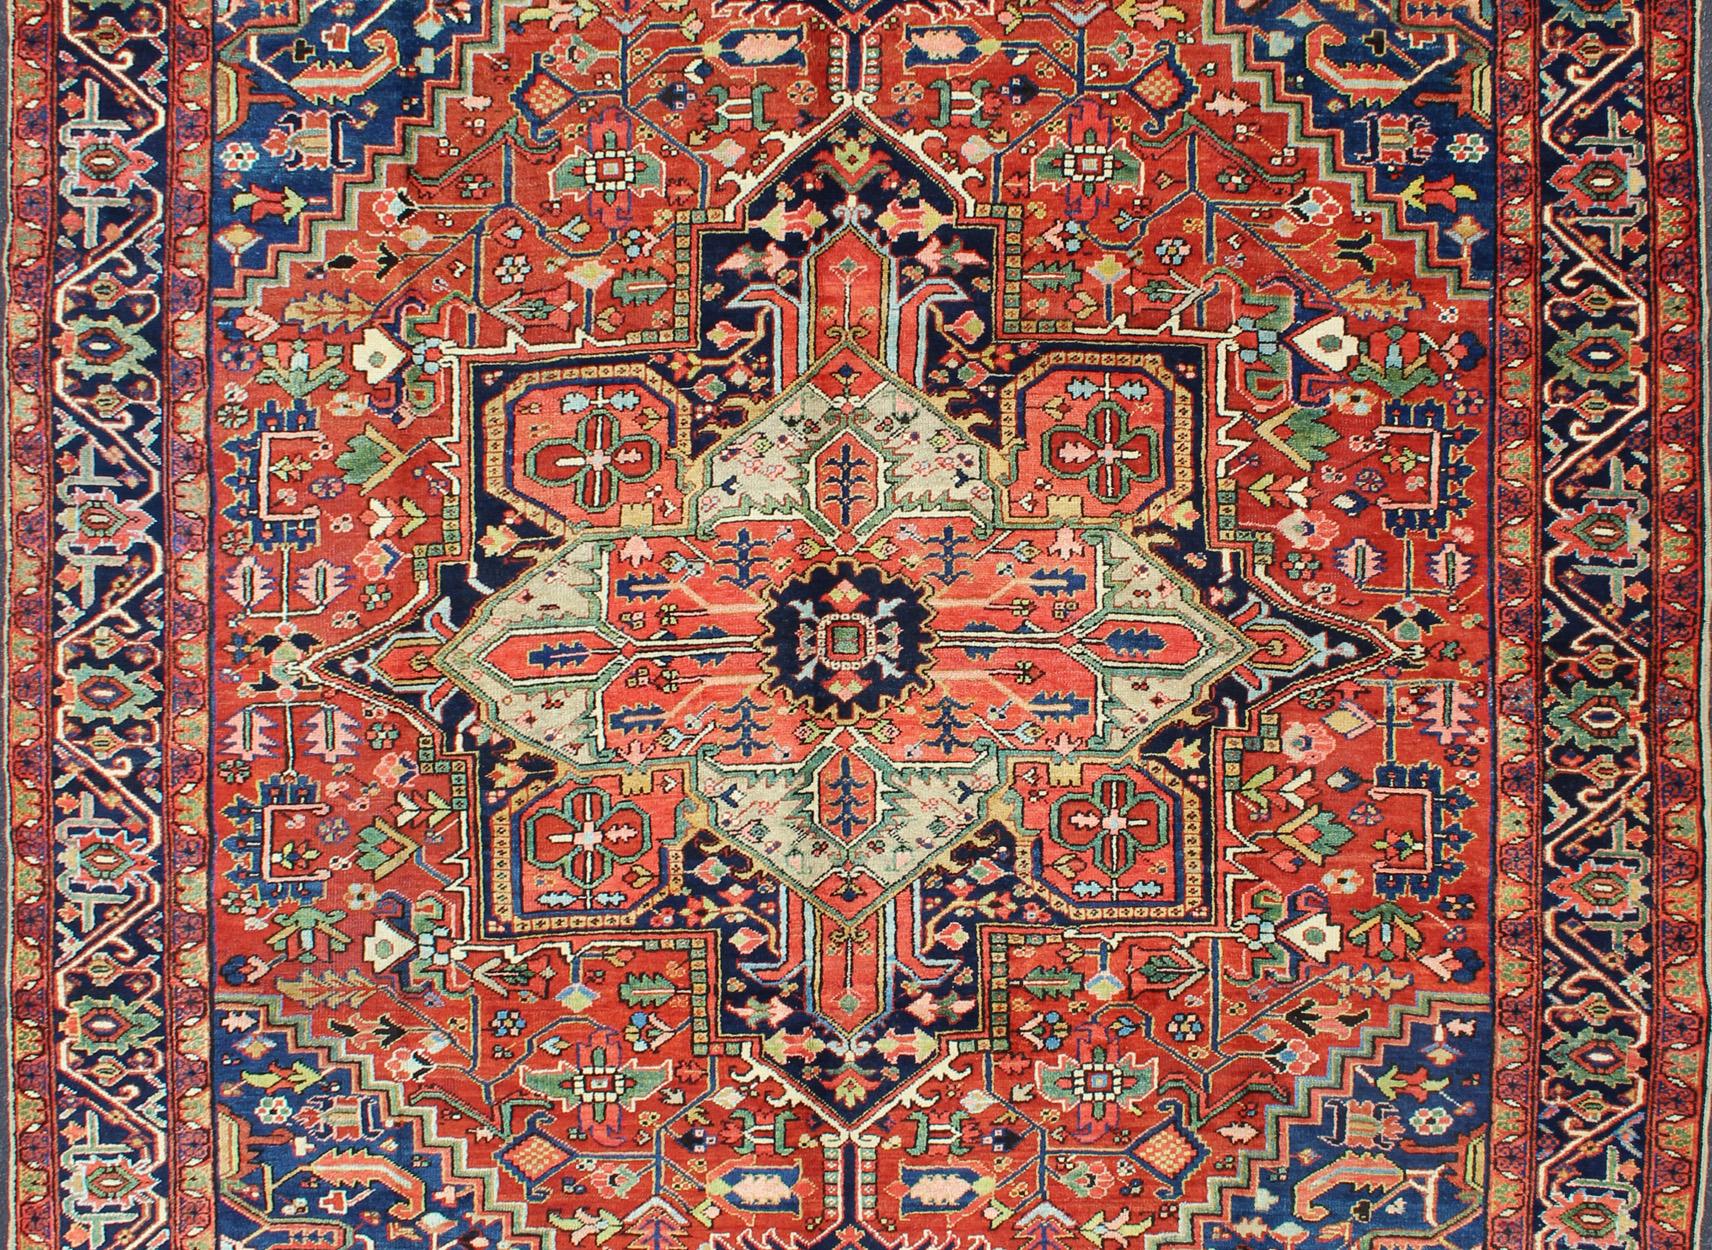 Colorful Antique Persian Heriz-Serapi With Geometric Medallion Design. Keivan Woven Arts / Rug / D-0907 / country of origin / type: Iran /Heriz, circa 1920's. 
Measures: 9'5 x 12'.
Made in the early 20th century, this charming Heriz-Serapi with a